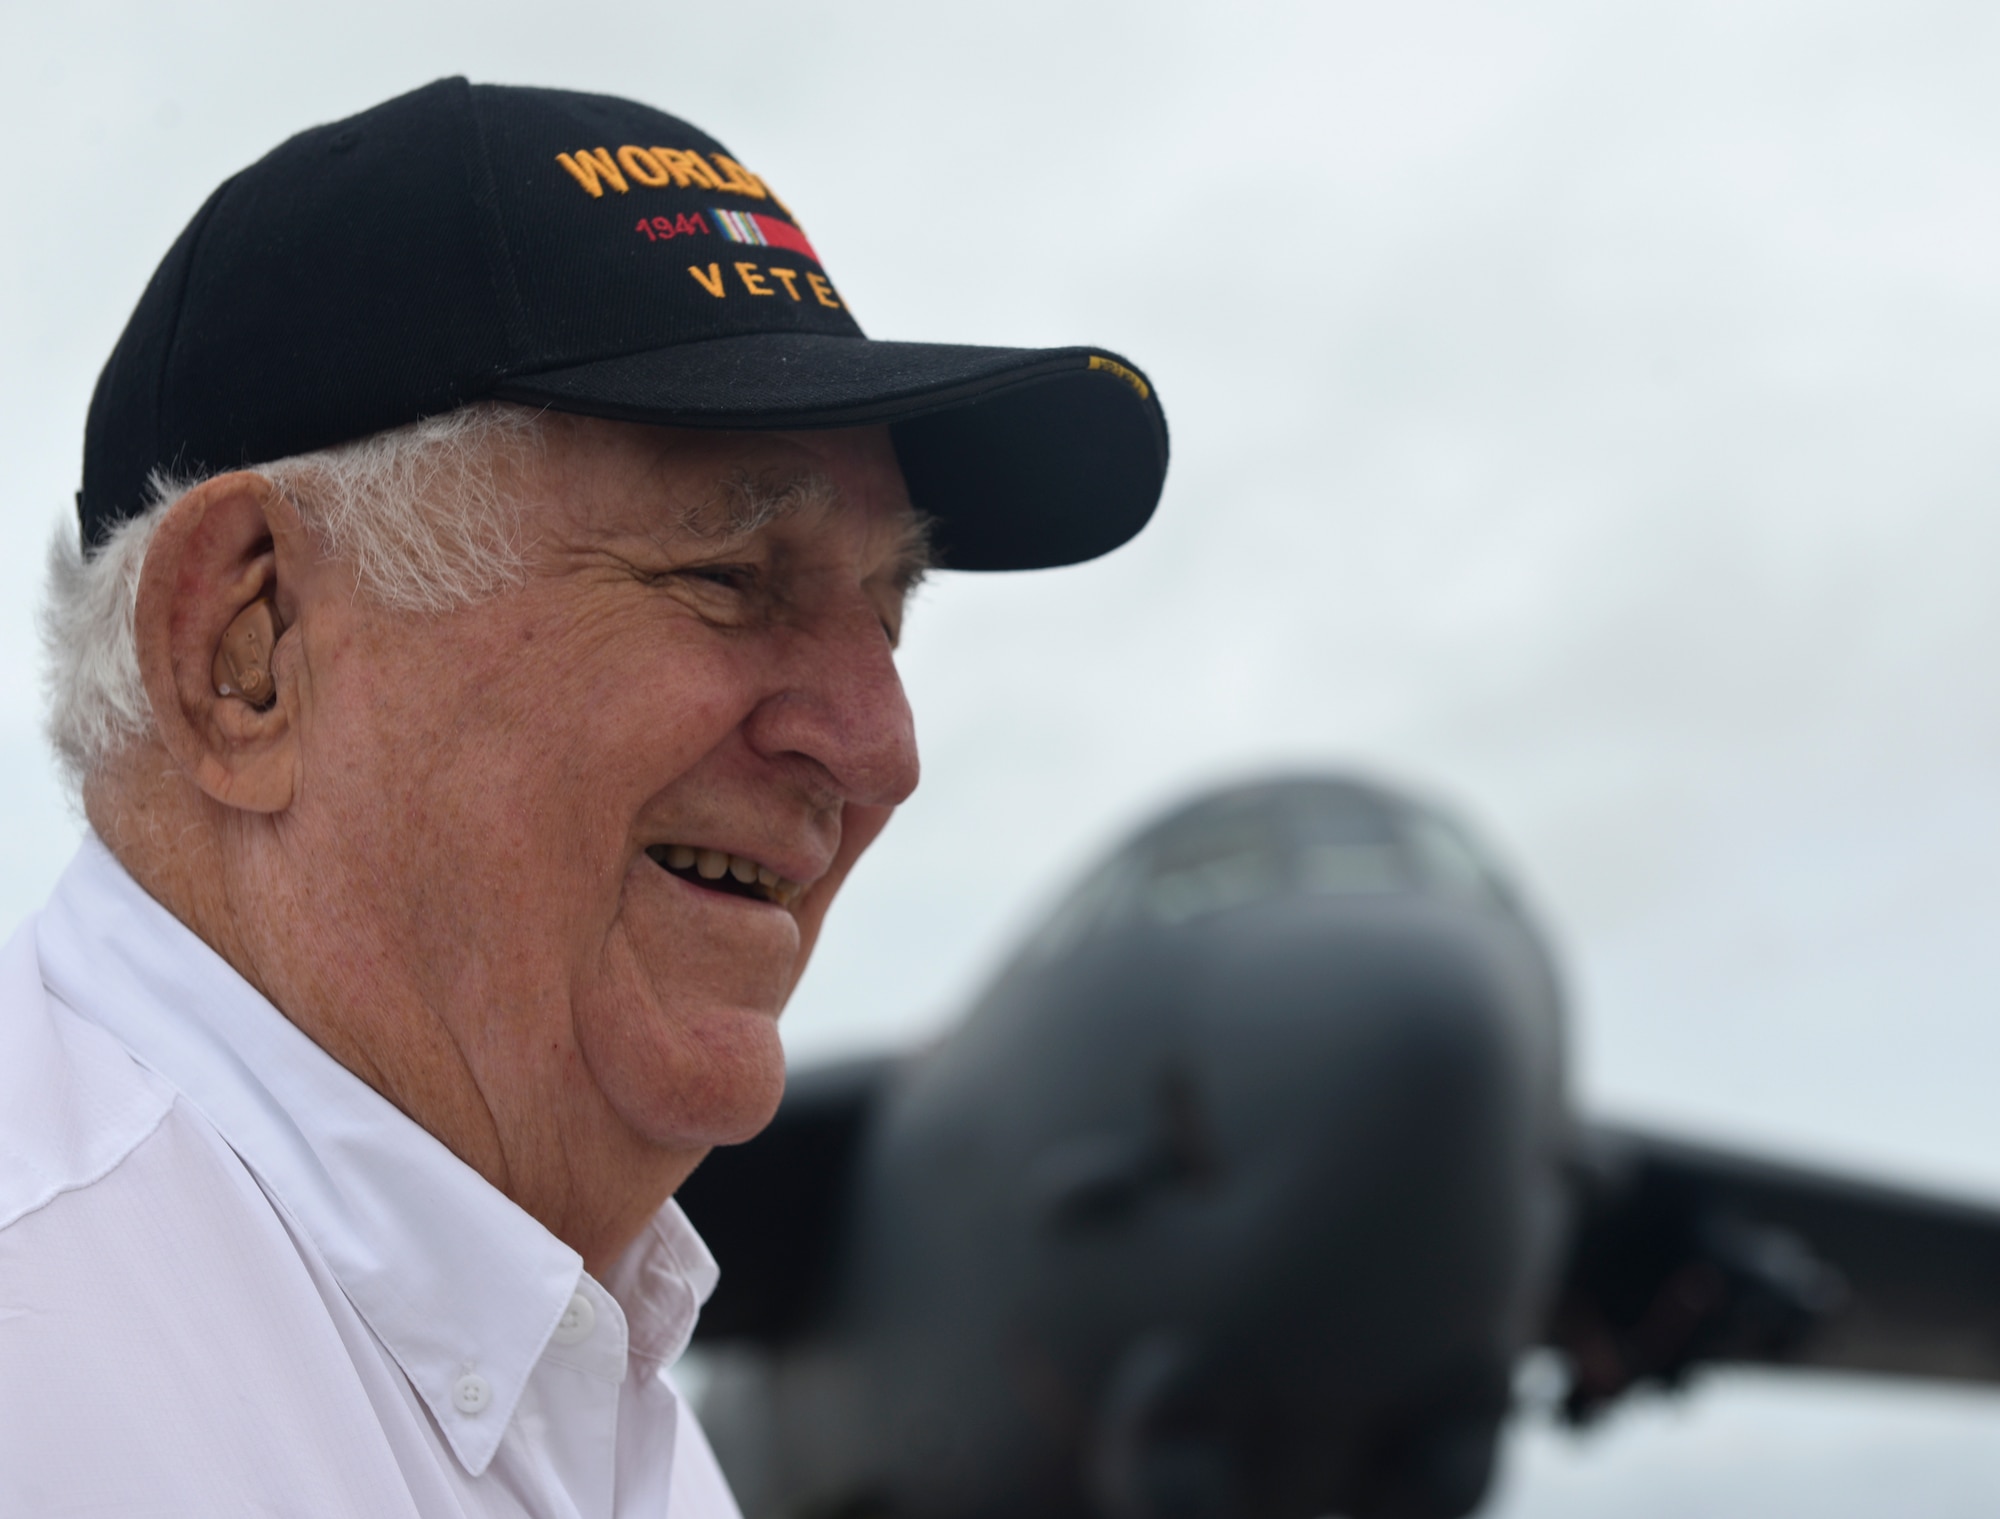 Rowland Ball, a World War II veteran, talks about his war experiences during a visit to Andersen Air Force Base, Guam, Aug. 16, 2016. Ball was stationed in Guam in 1945 and visited the island for the first time in 71 years. (U.S. Air Force photo by Staff Sgt. Benjamin Gonsier)  